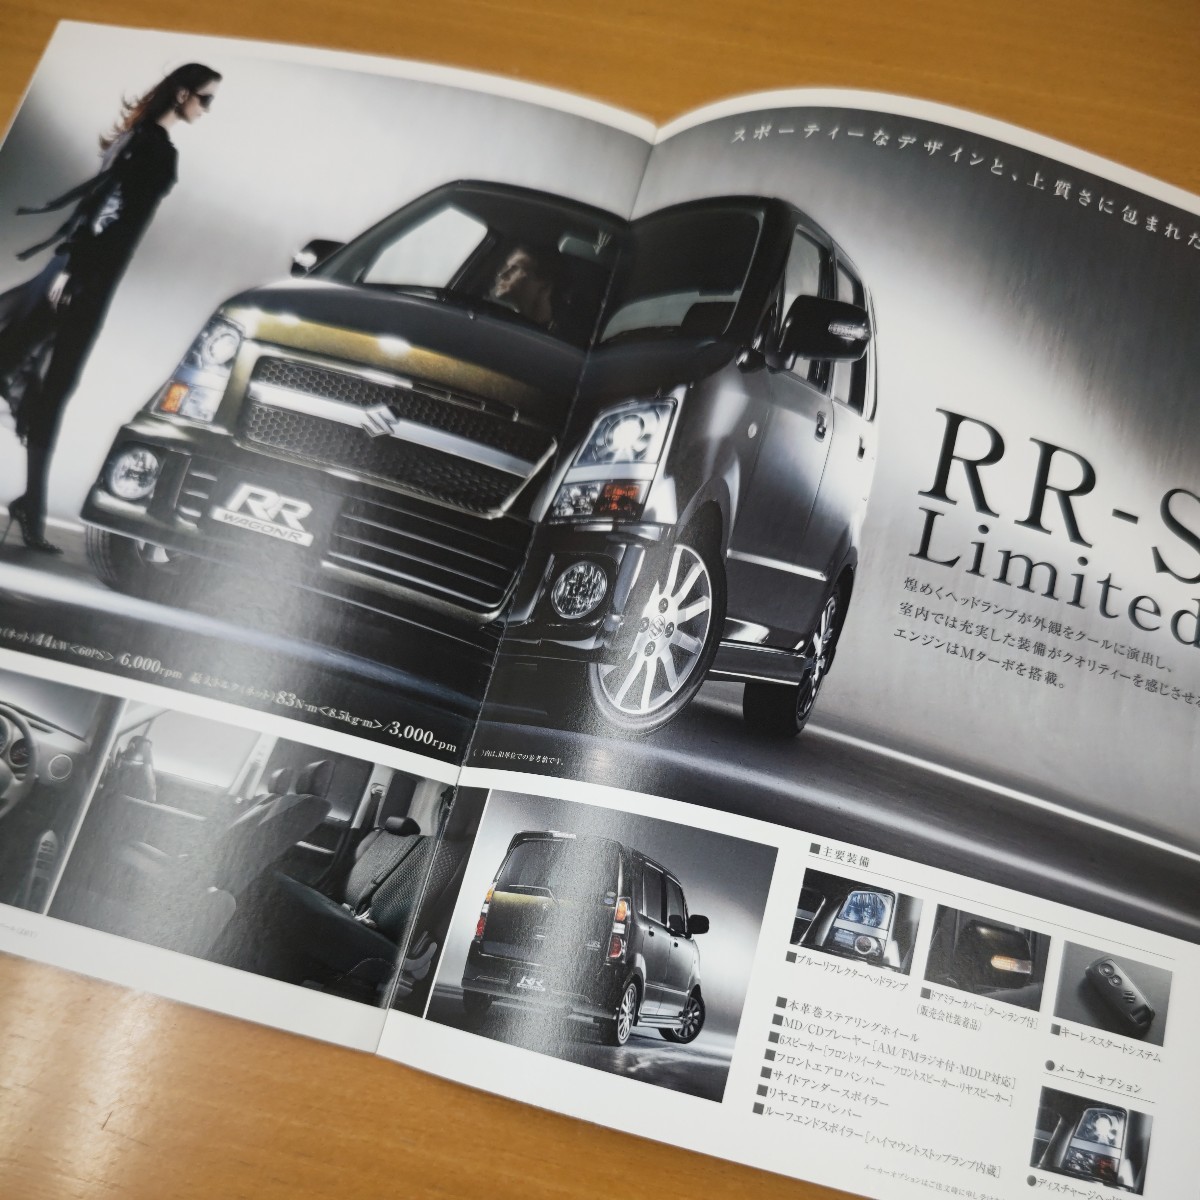  Suzuki Wagon R Limited FX-S/FT-S/RR-S catalog & vehicle price table ( recommendation accessory introduction attaching )2 point set out of print 2007 year that time thing famous car rare old car 